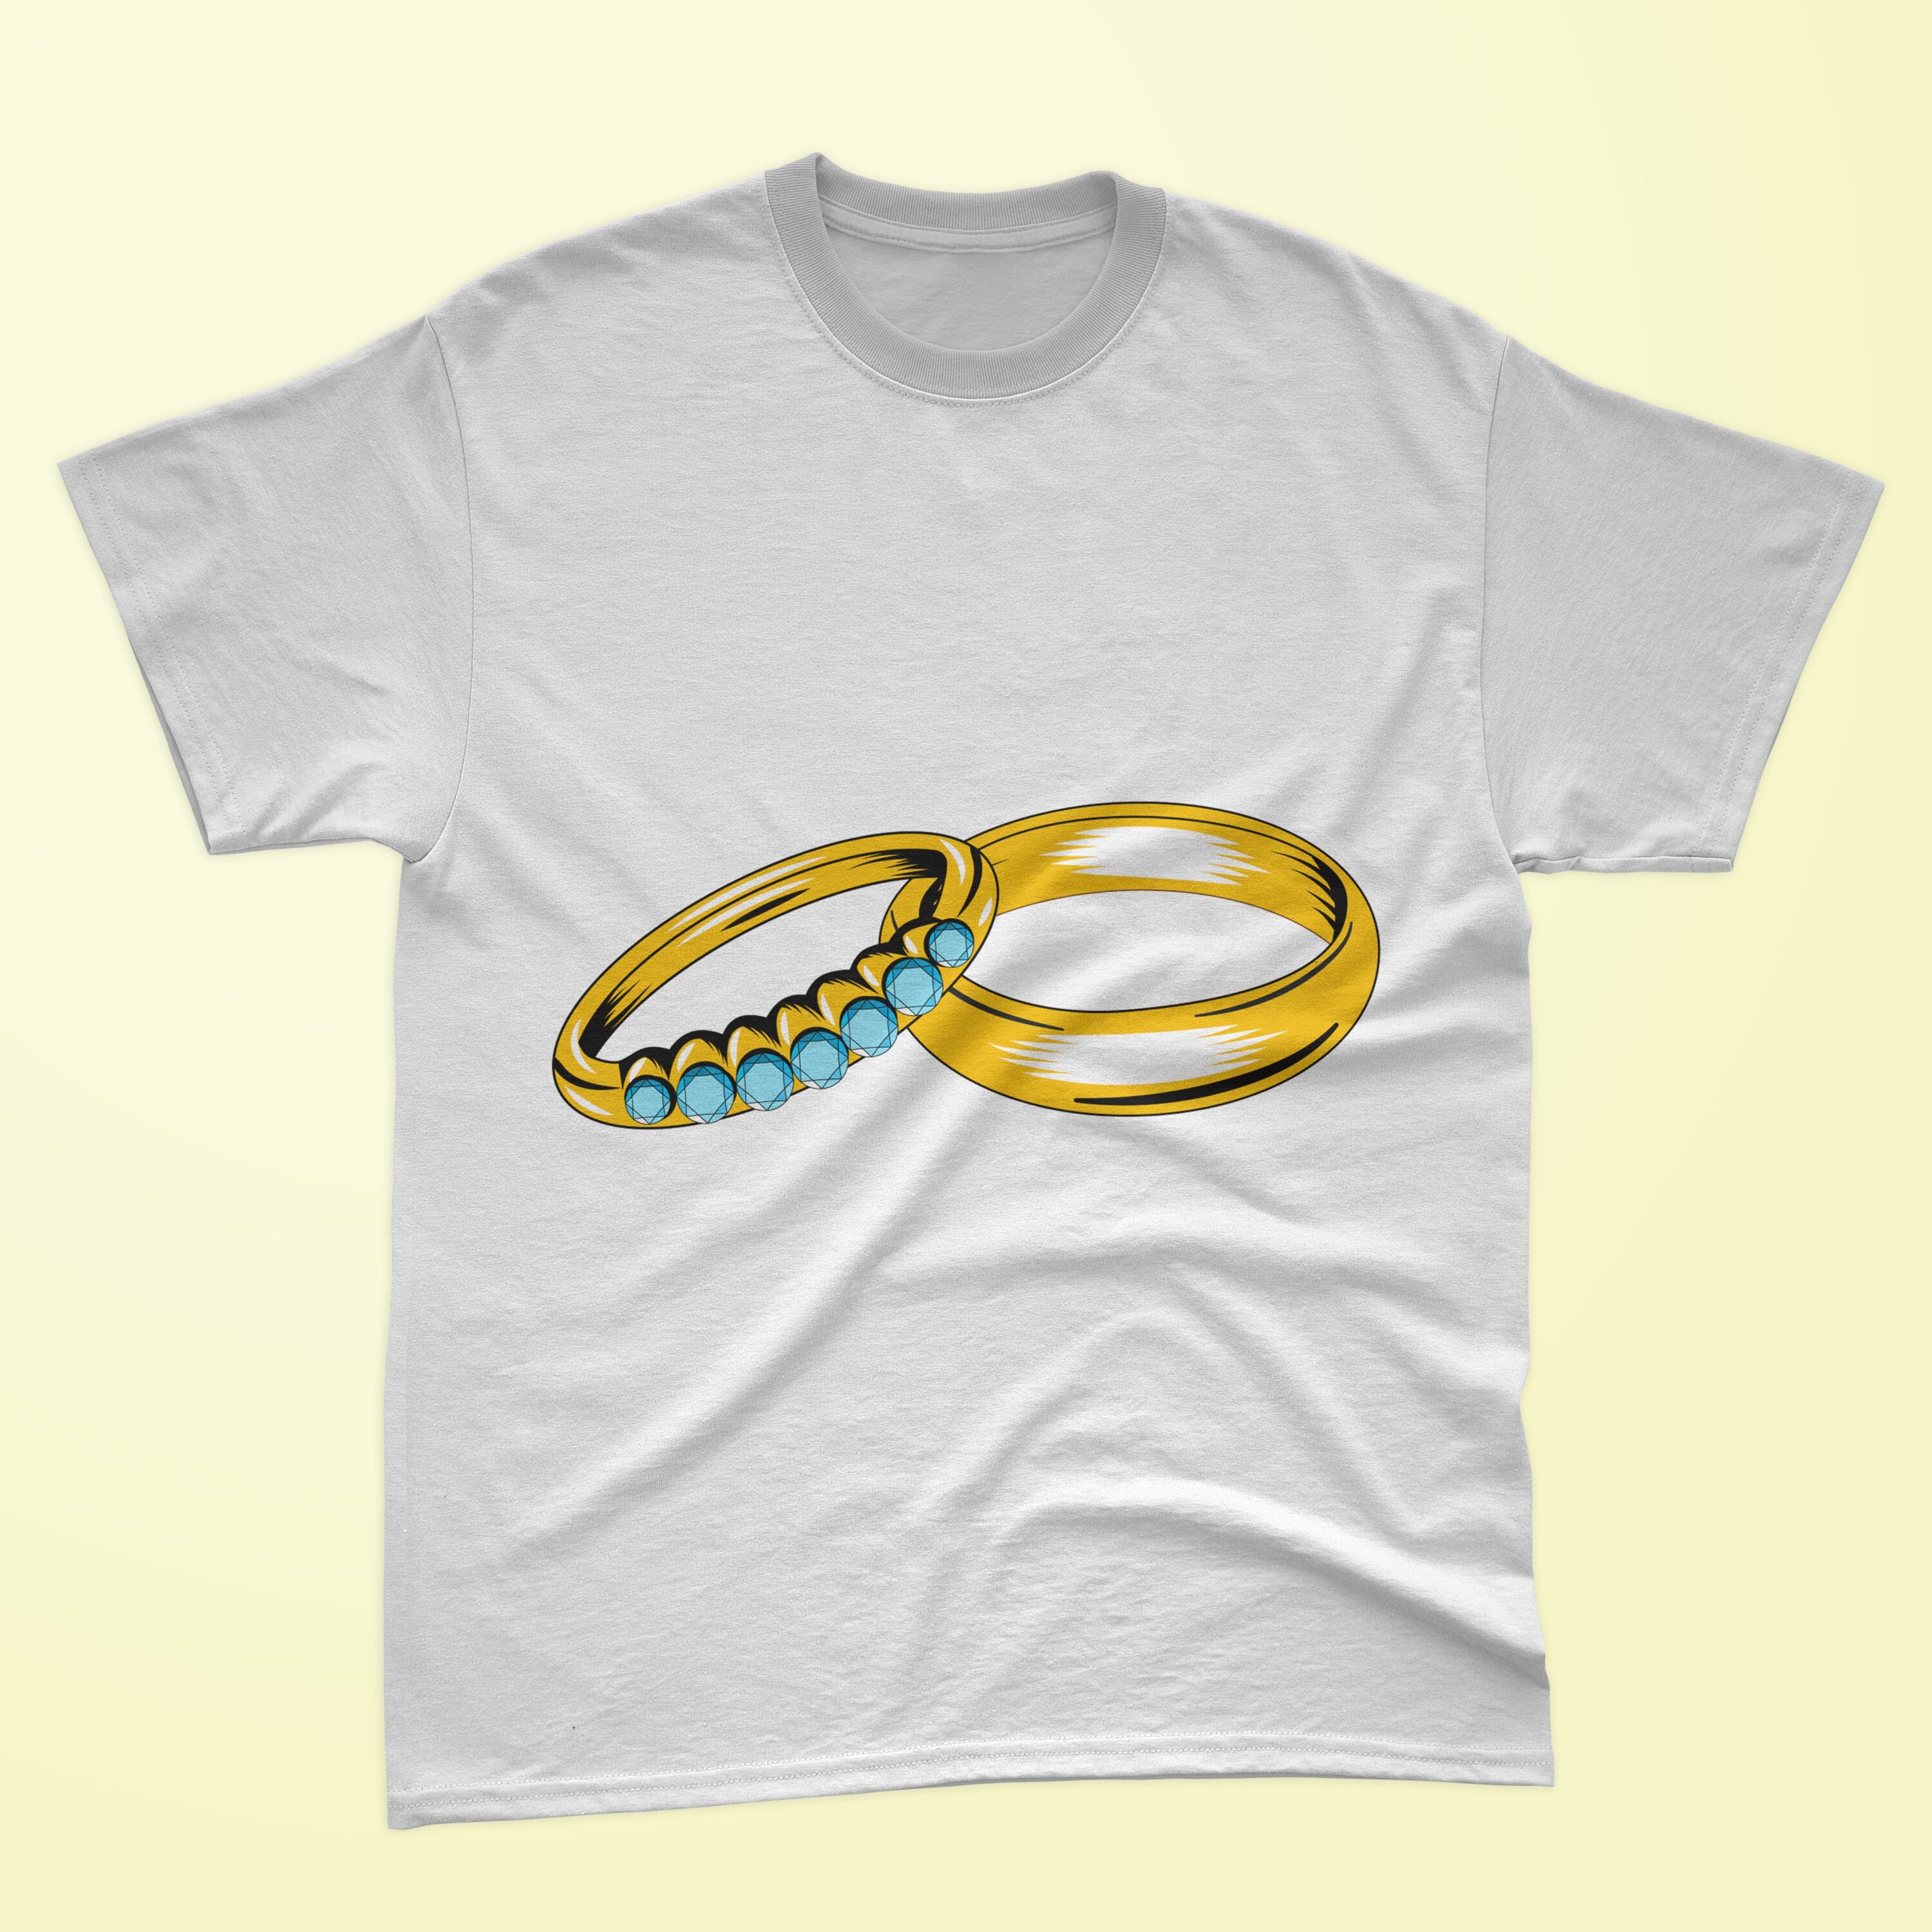 Picture of T-shirt with wonderful print of engagement rings.